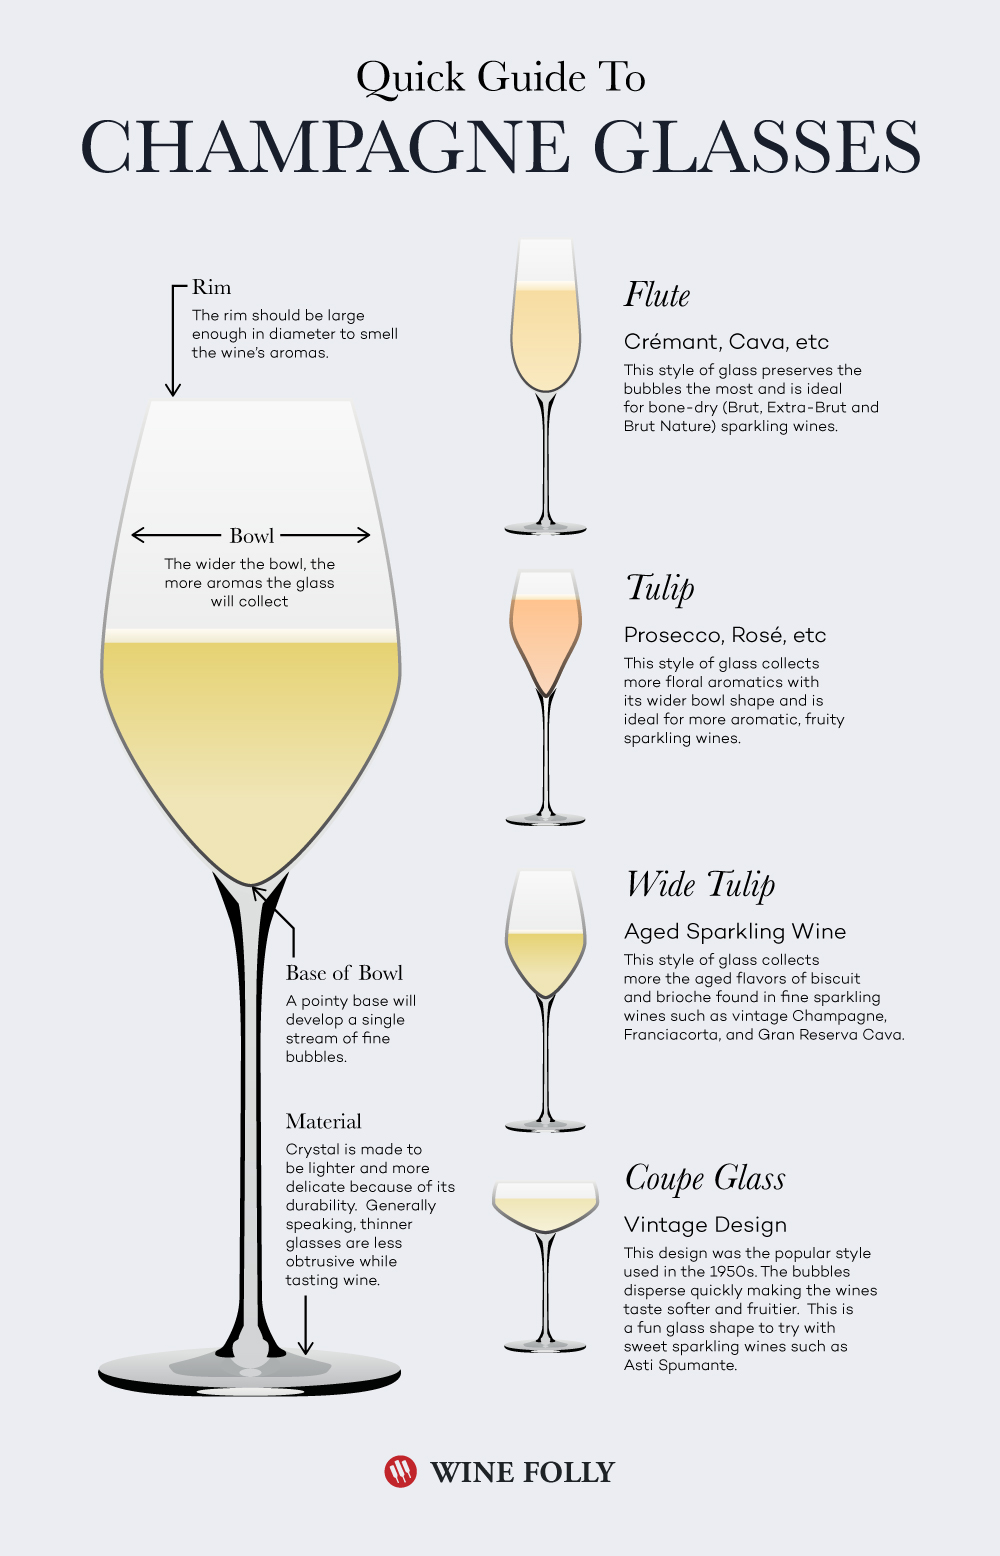 https://www.montemaggio.com/files/2019/05/champagne-glasses-flutes-types-wine-folly.jpg